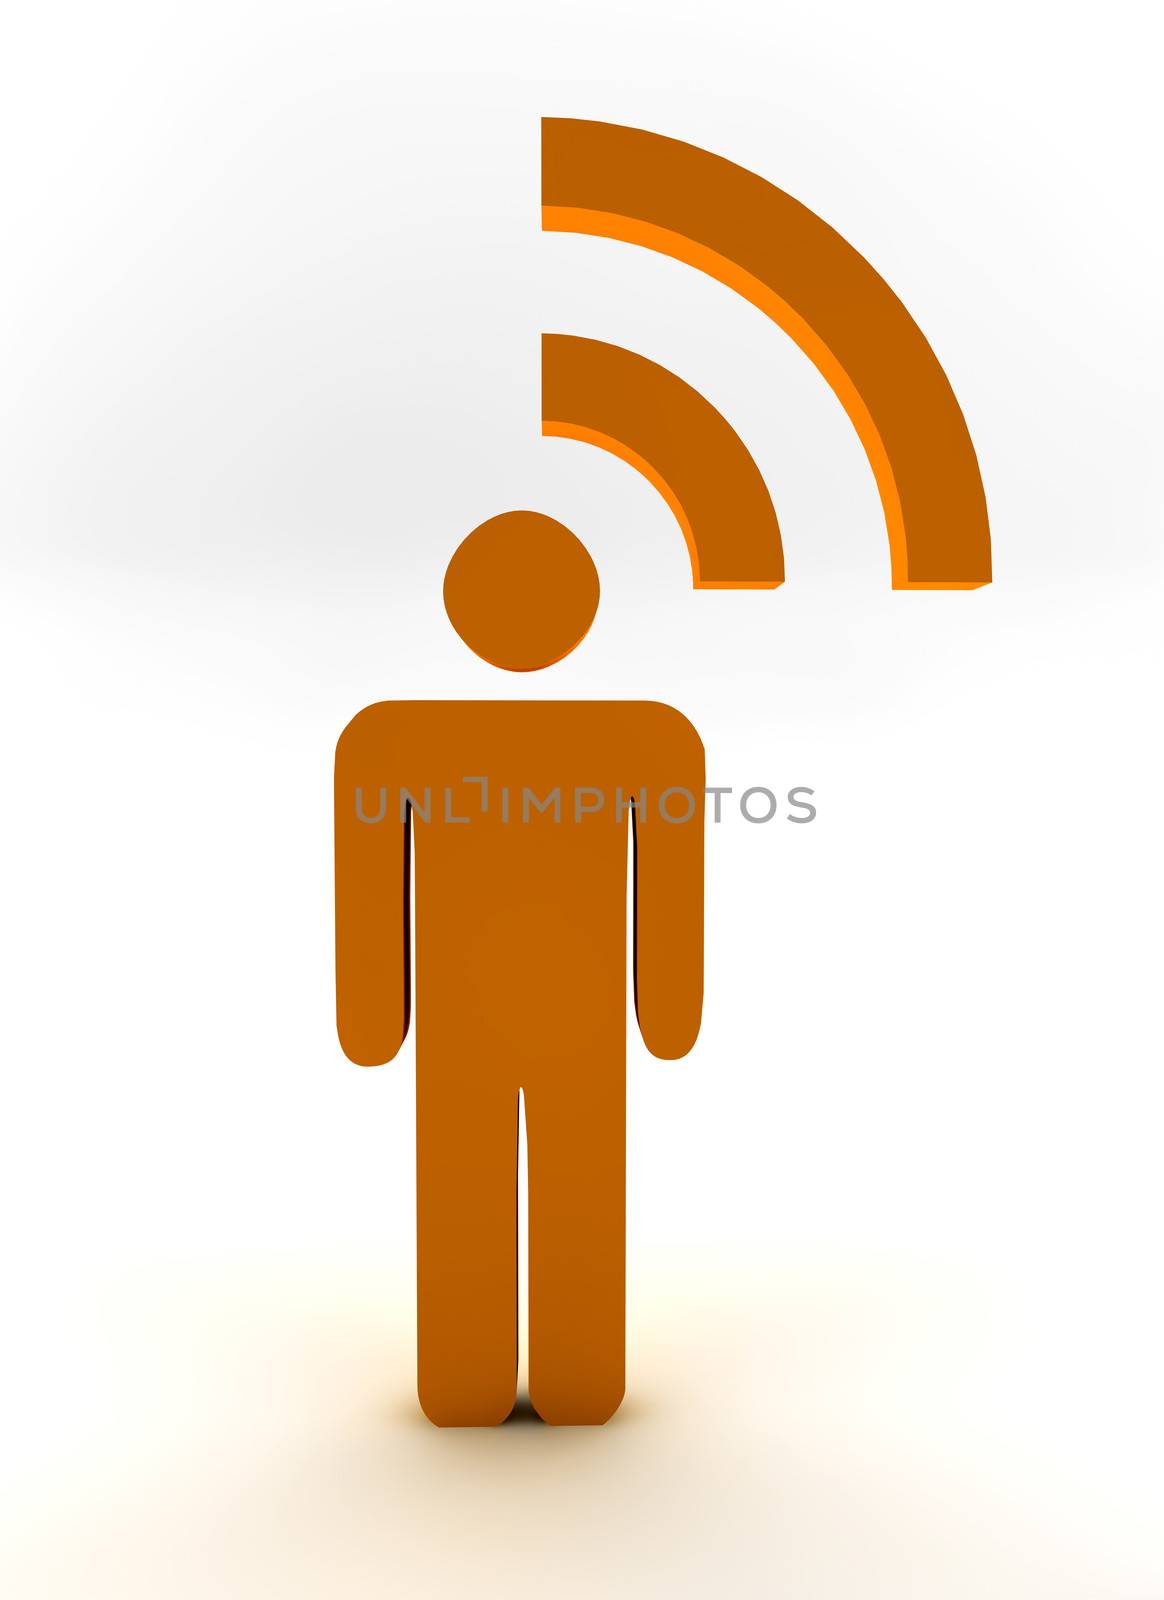 Head of a man is the point of the wifi symbol